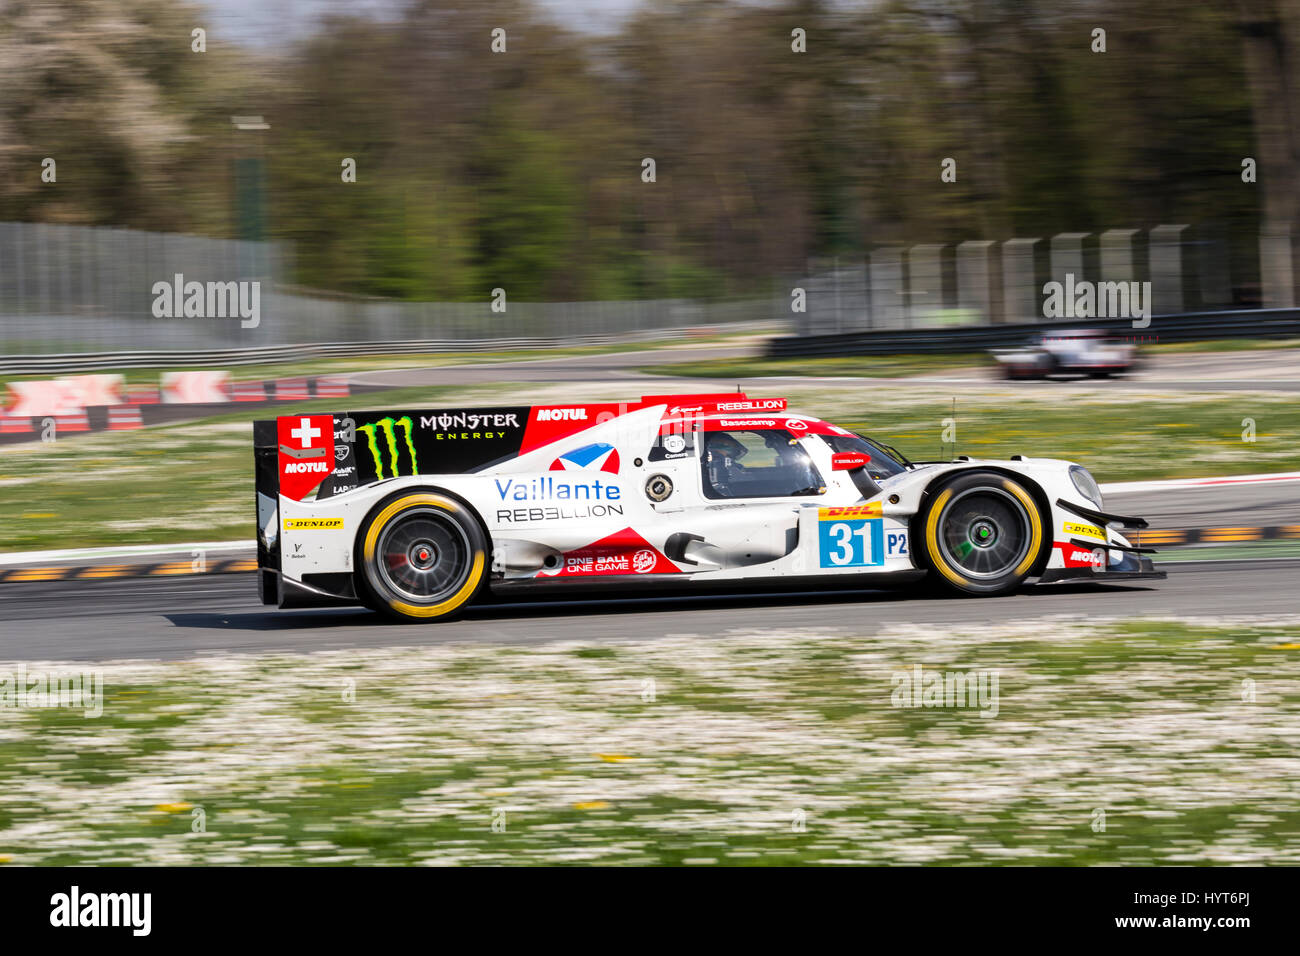 Monza, Italy - April 01, 2017: Oreca 07 - Gibson of Bykolles Racing Vaillante Rebellion Team, driven by J. Canal and B. Senna during the FIA WEC Stock Photo